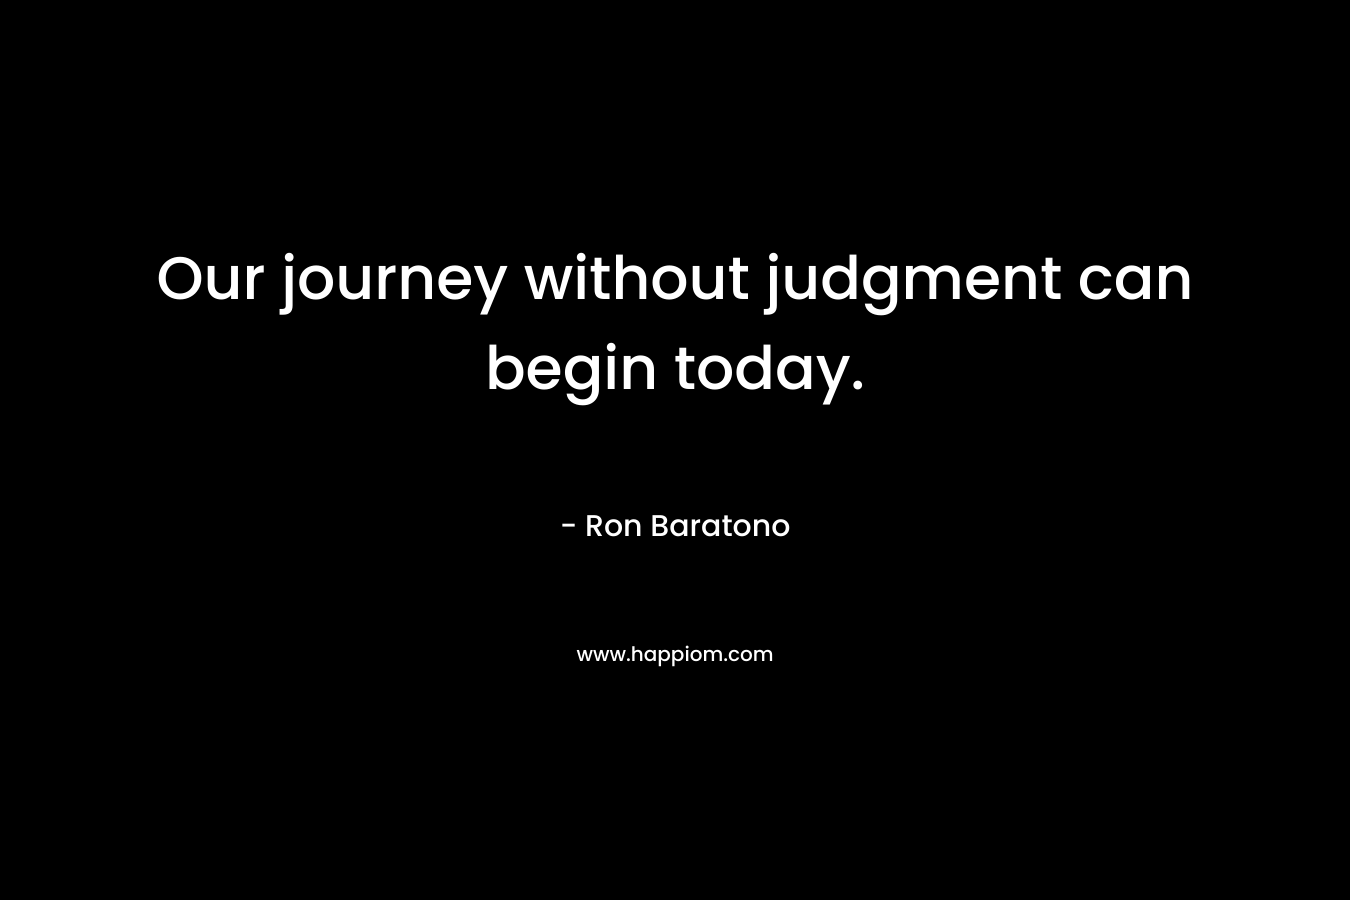 Our journey without judgment can begin today. – Ron Baratono